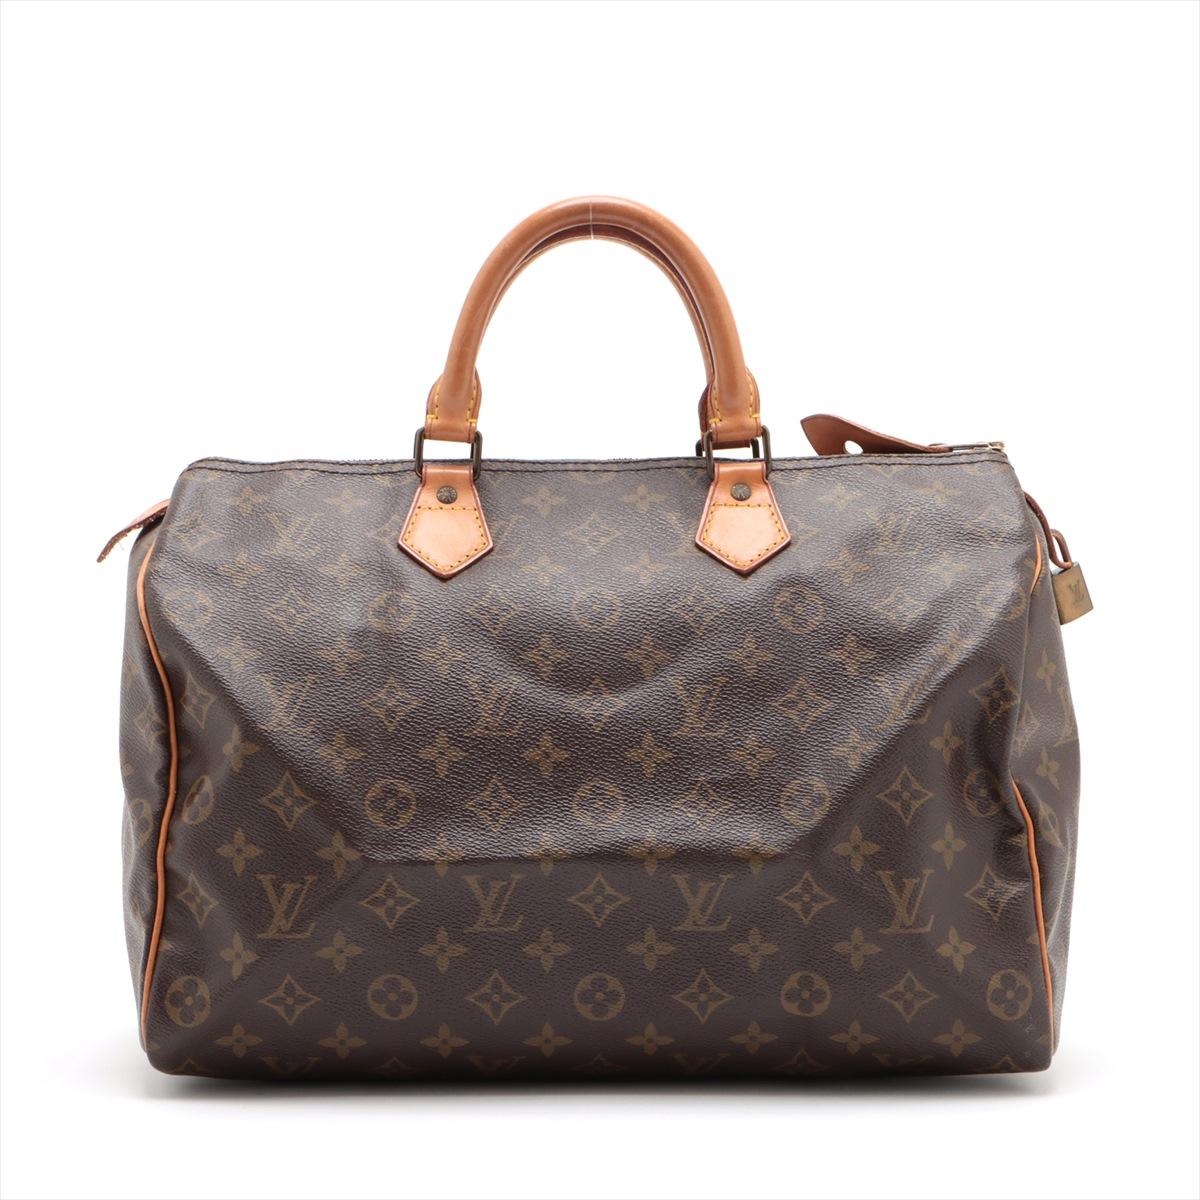 The Louis Vuitton Monogram Speedy 35 is a quintessential and iconic handbag that embodies the timeless elegance and luxury. With its classic design and spacious interior, it has remained a favorite among fashion enthusiasts for decades. Crafted from